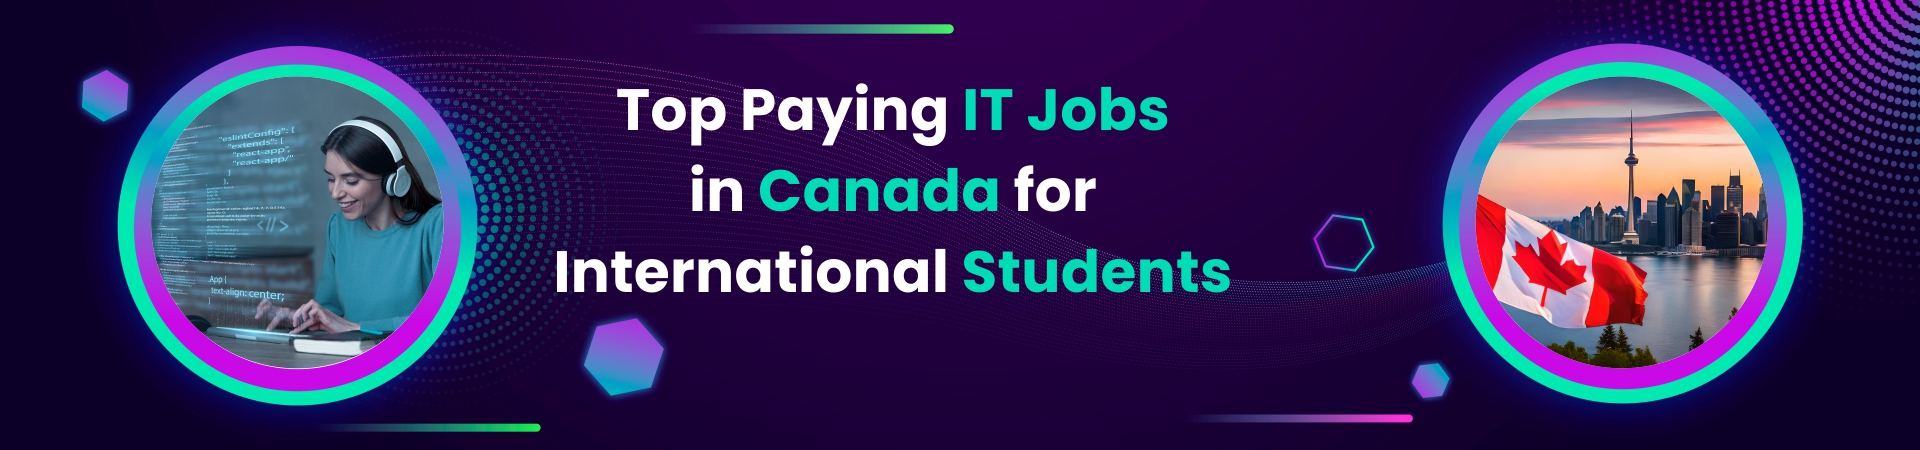 Top paying IT jobs in Canada for international students 